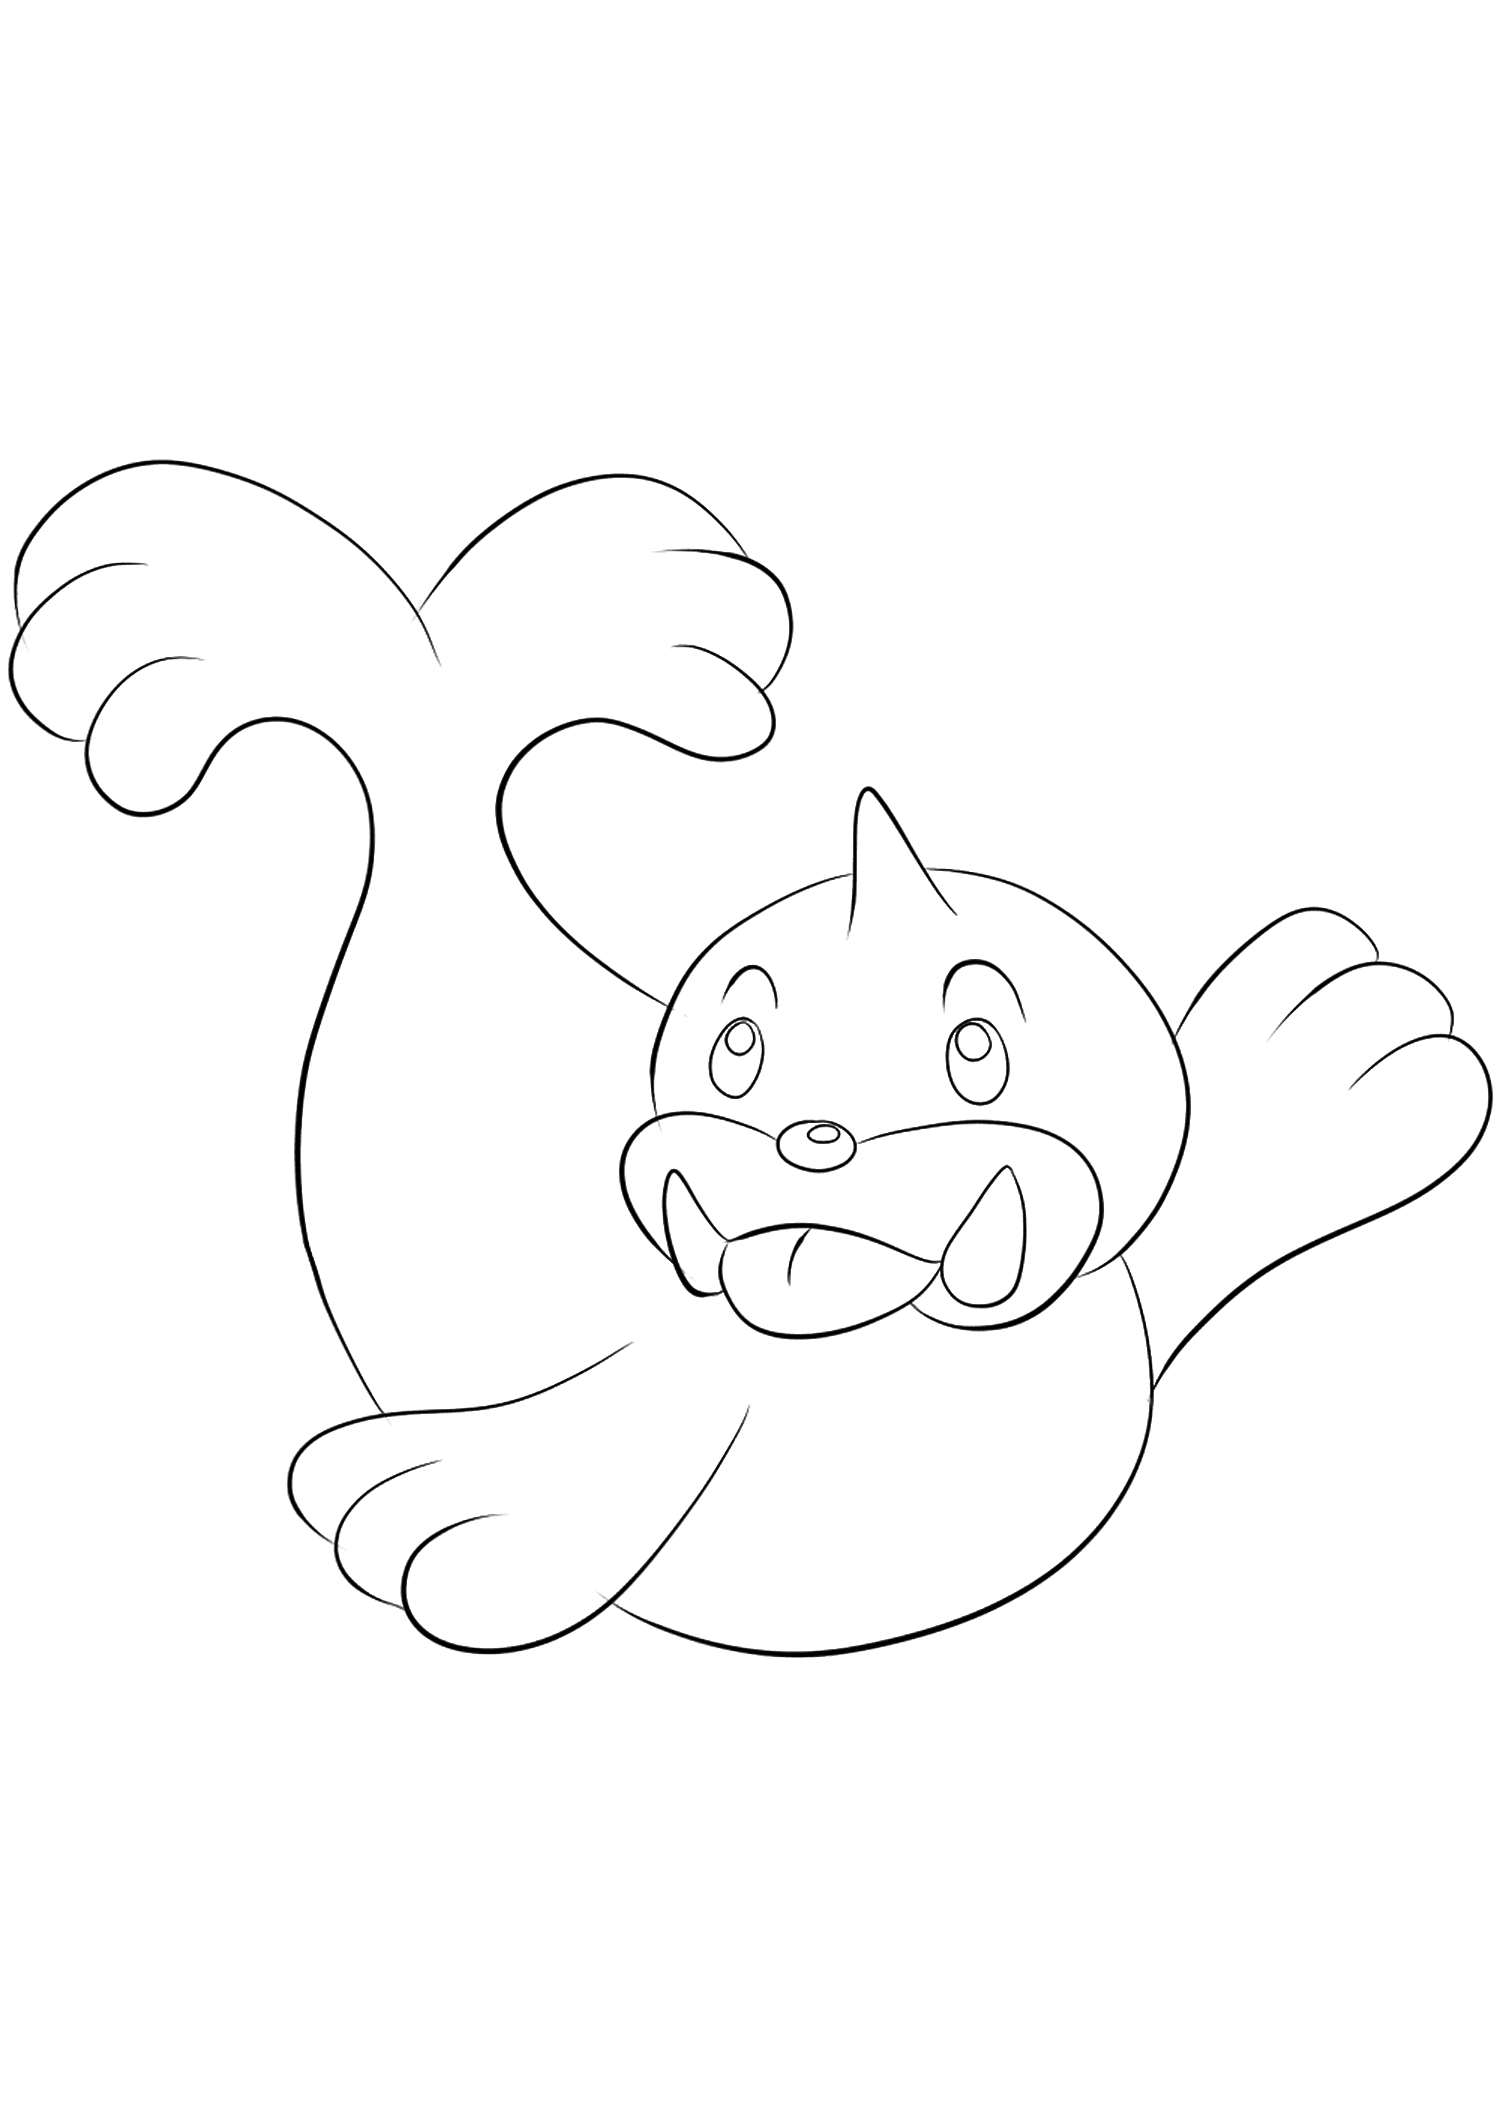 Seel (No.86). Seel Coloring page, Generation I Pokemon of type WaterOriginal image credit: Pokemon linearts by Lilly Gerbil on Deviantart.Permission:  All rights reserved © Pokemon company and Ken Sugimori.